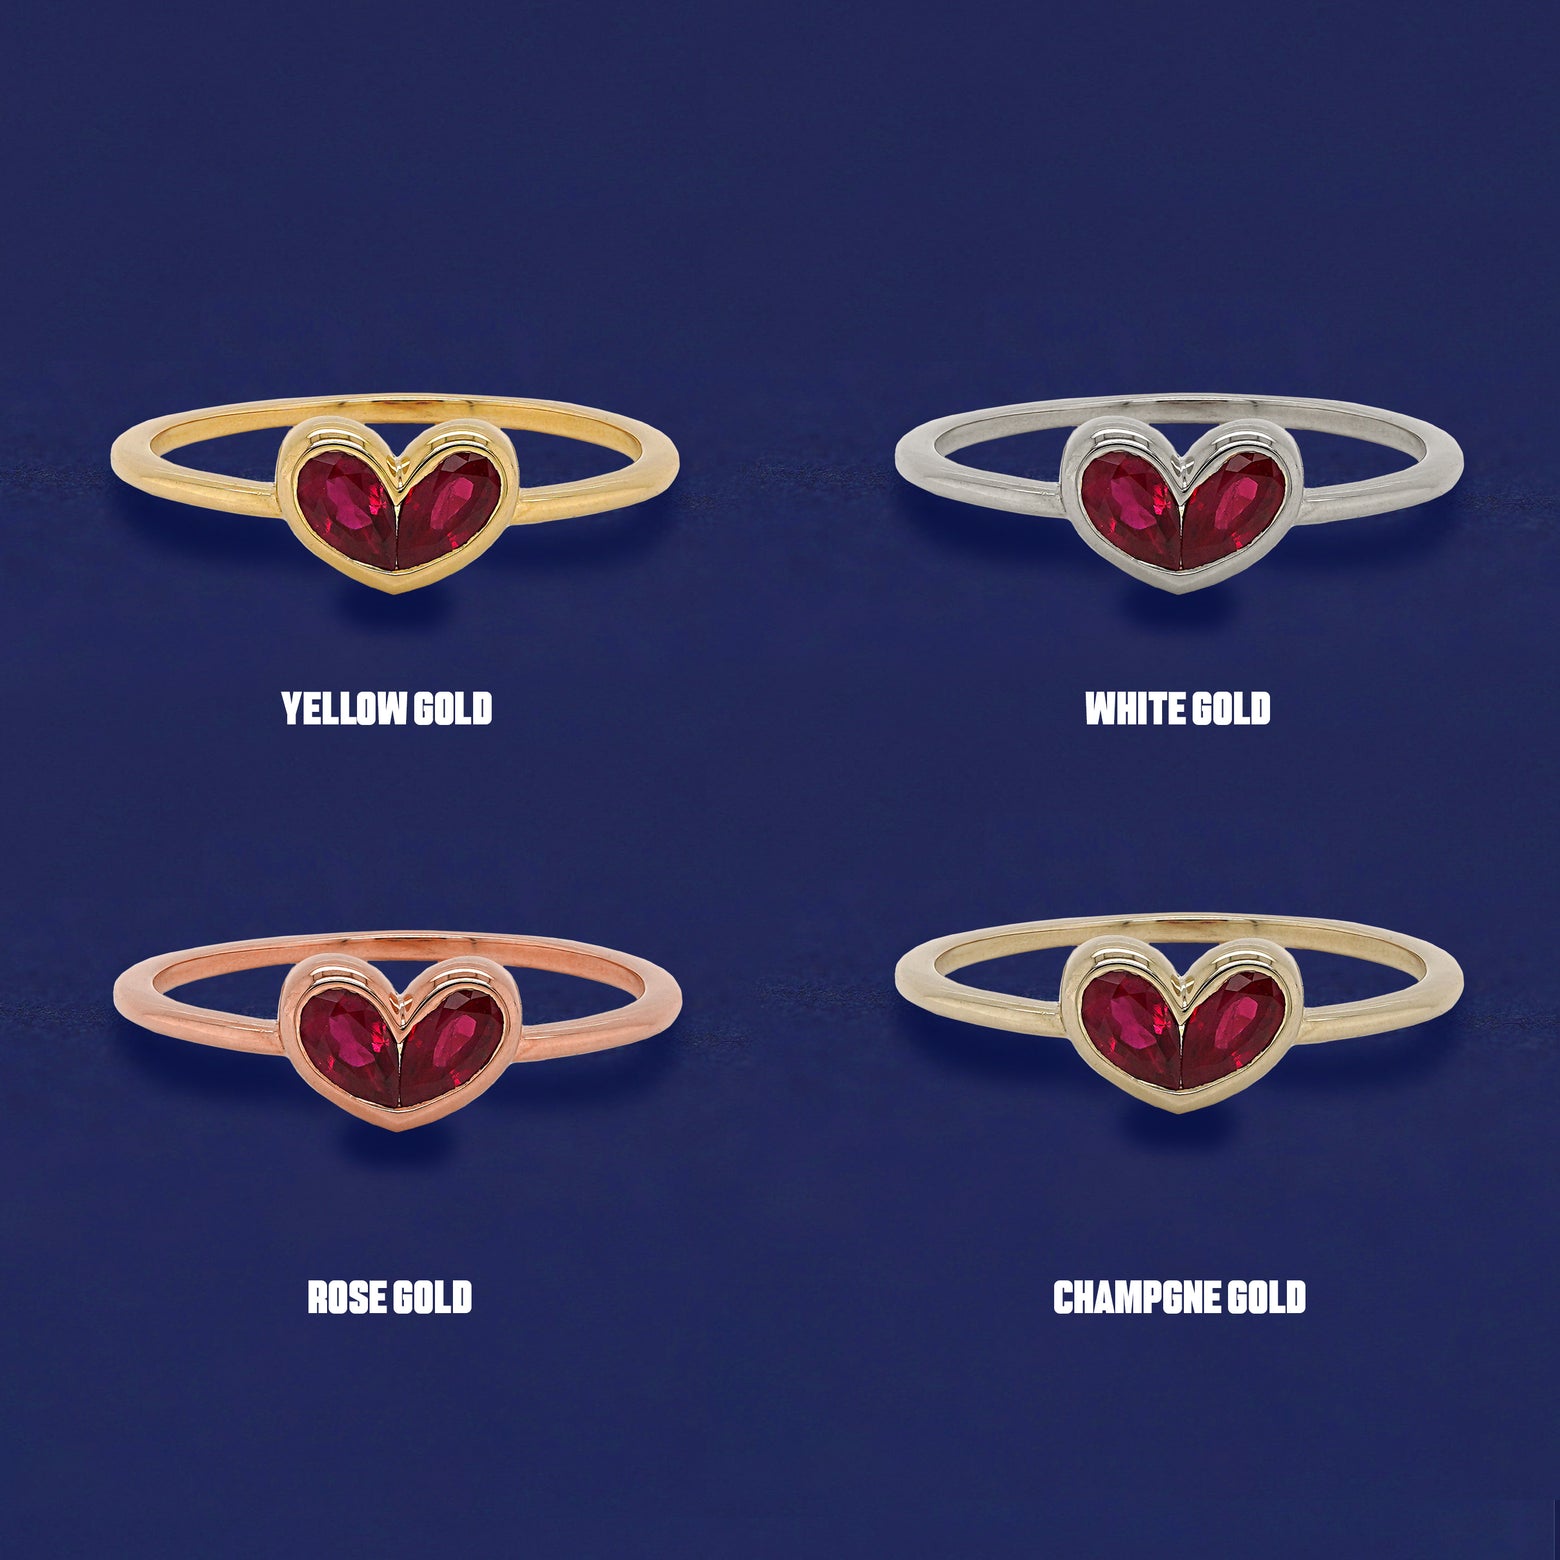 Four versions of the Ruby Heart Ring shown in options of yellow, white, rose, and champagne gold